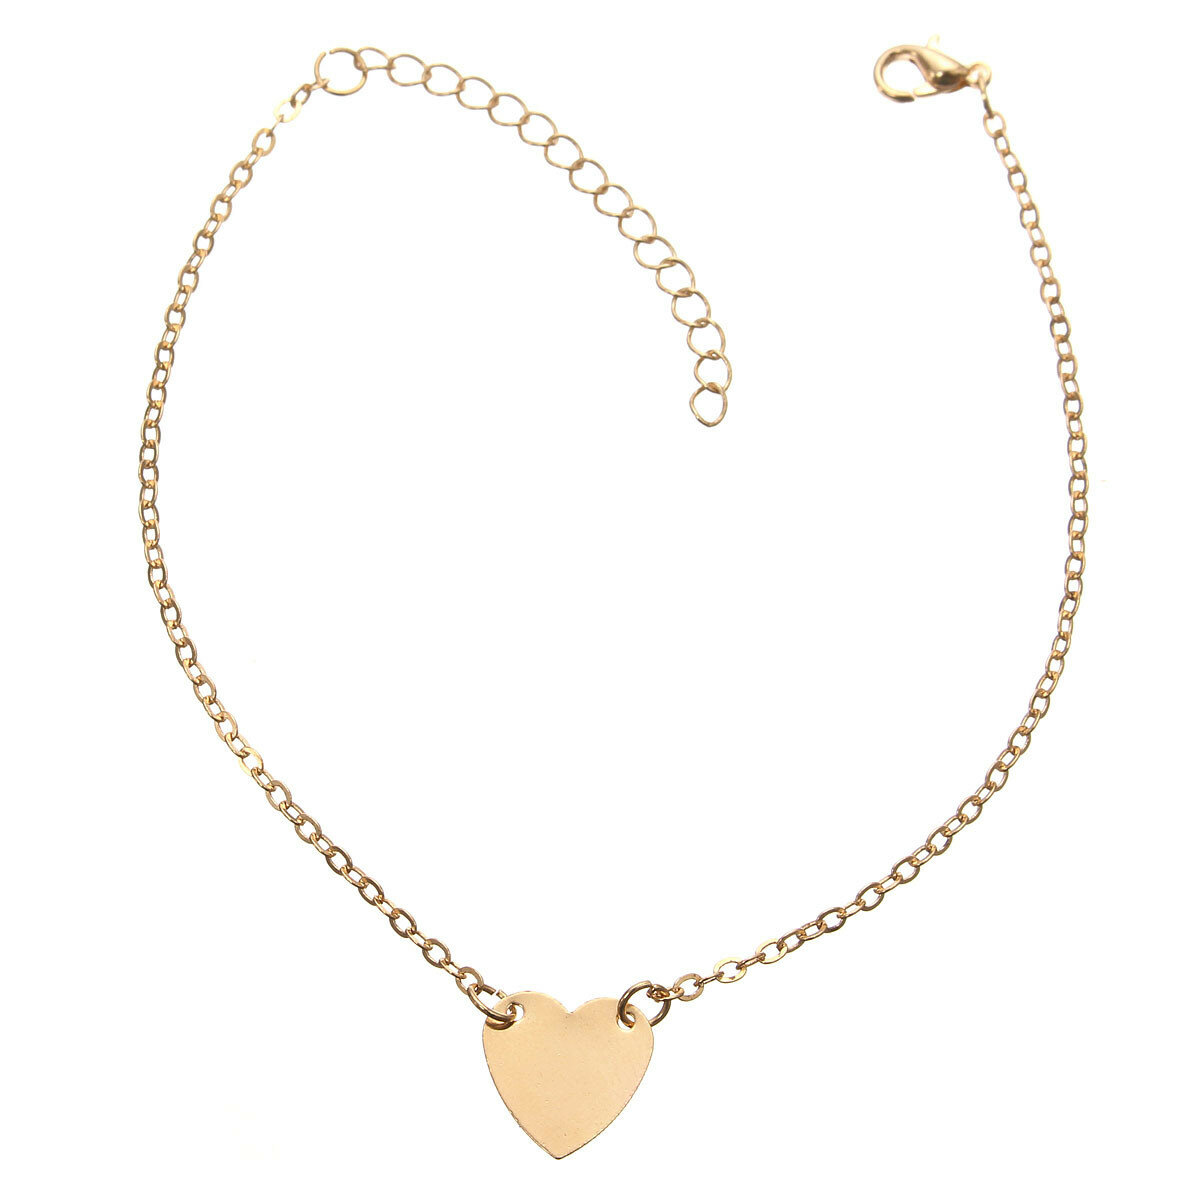 Sweet Love Heart Adjustable Chain Anklets